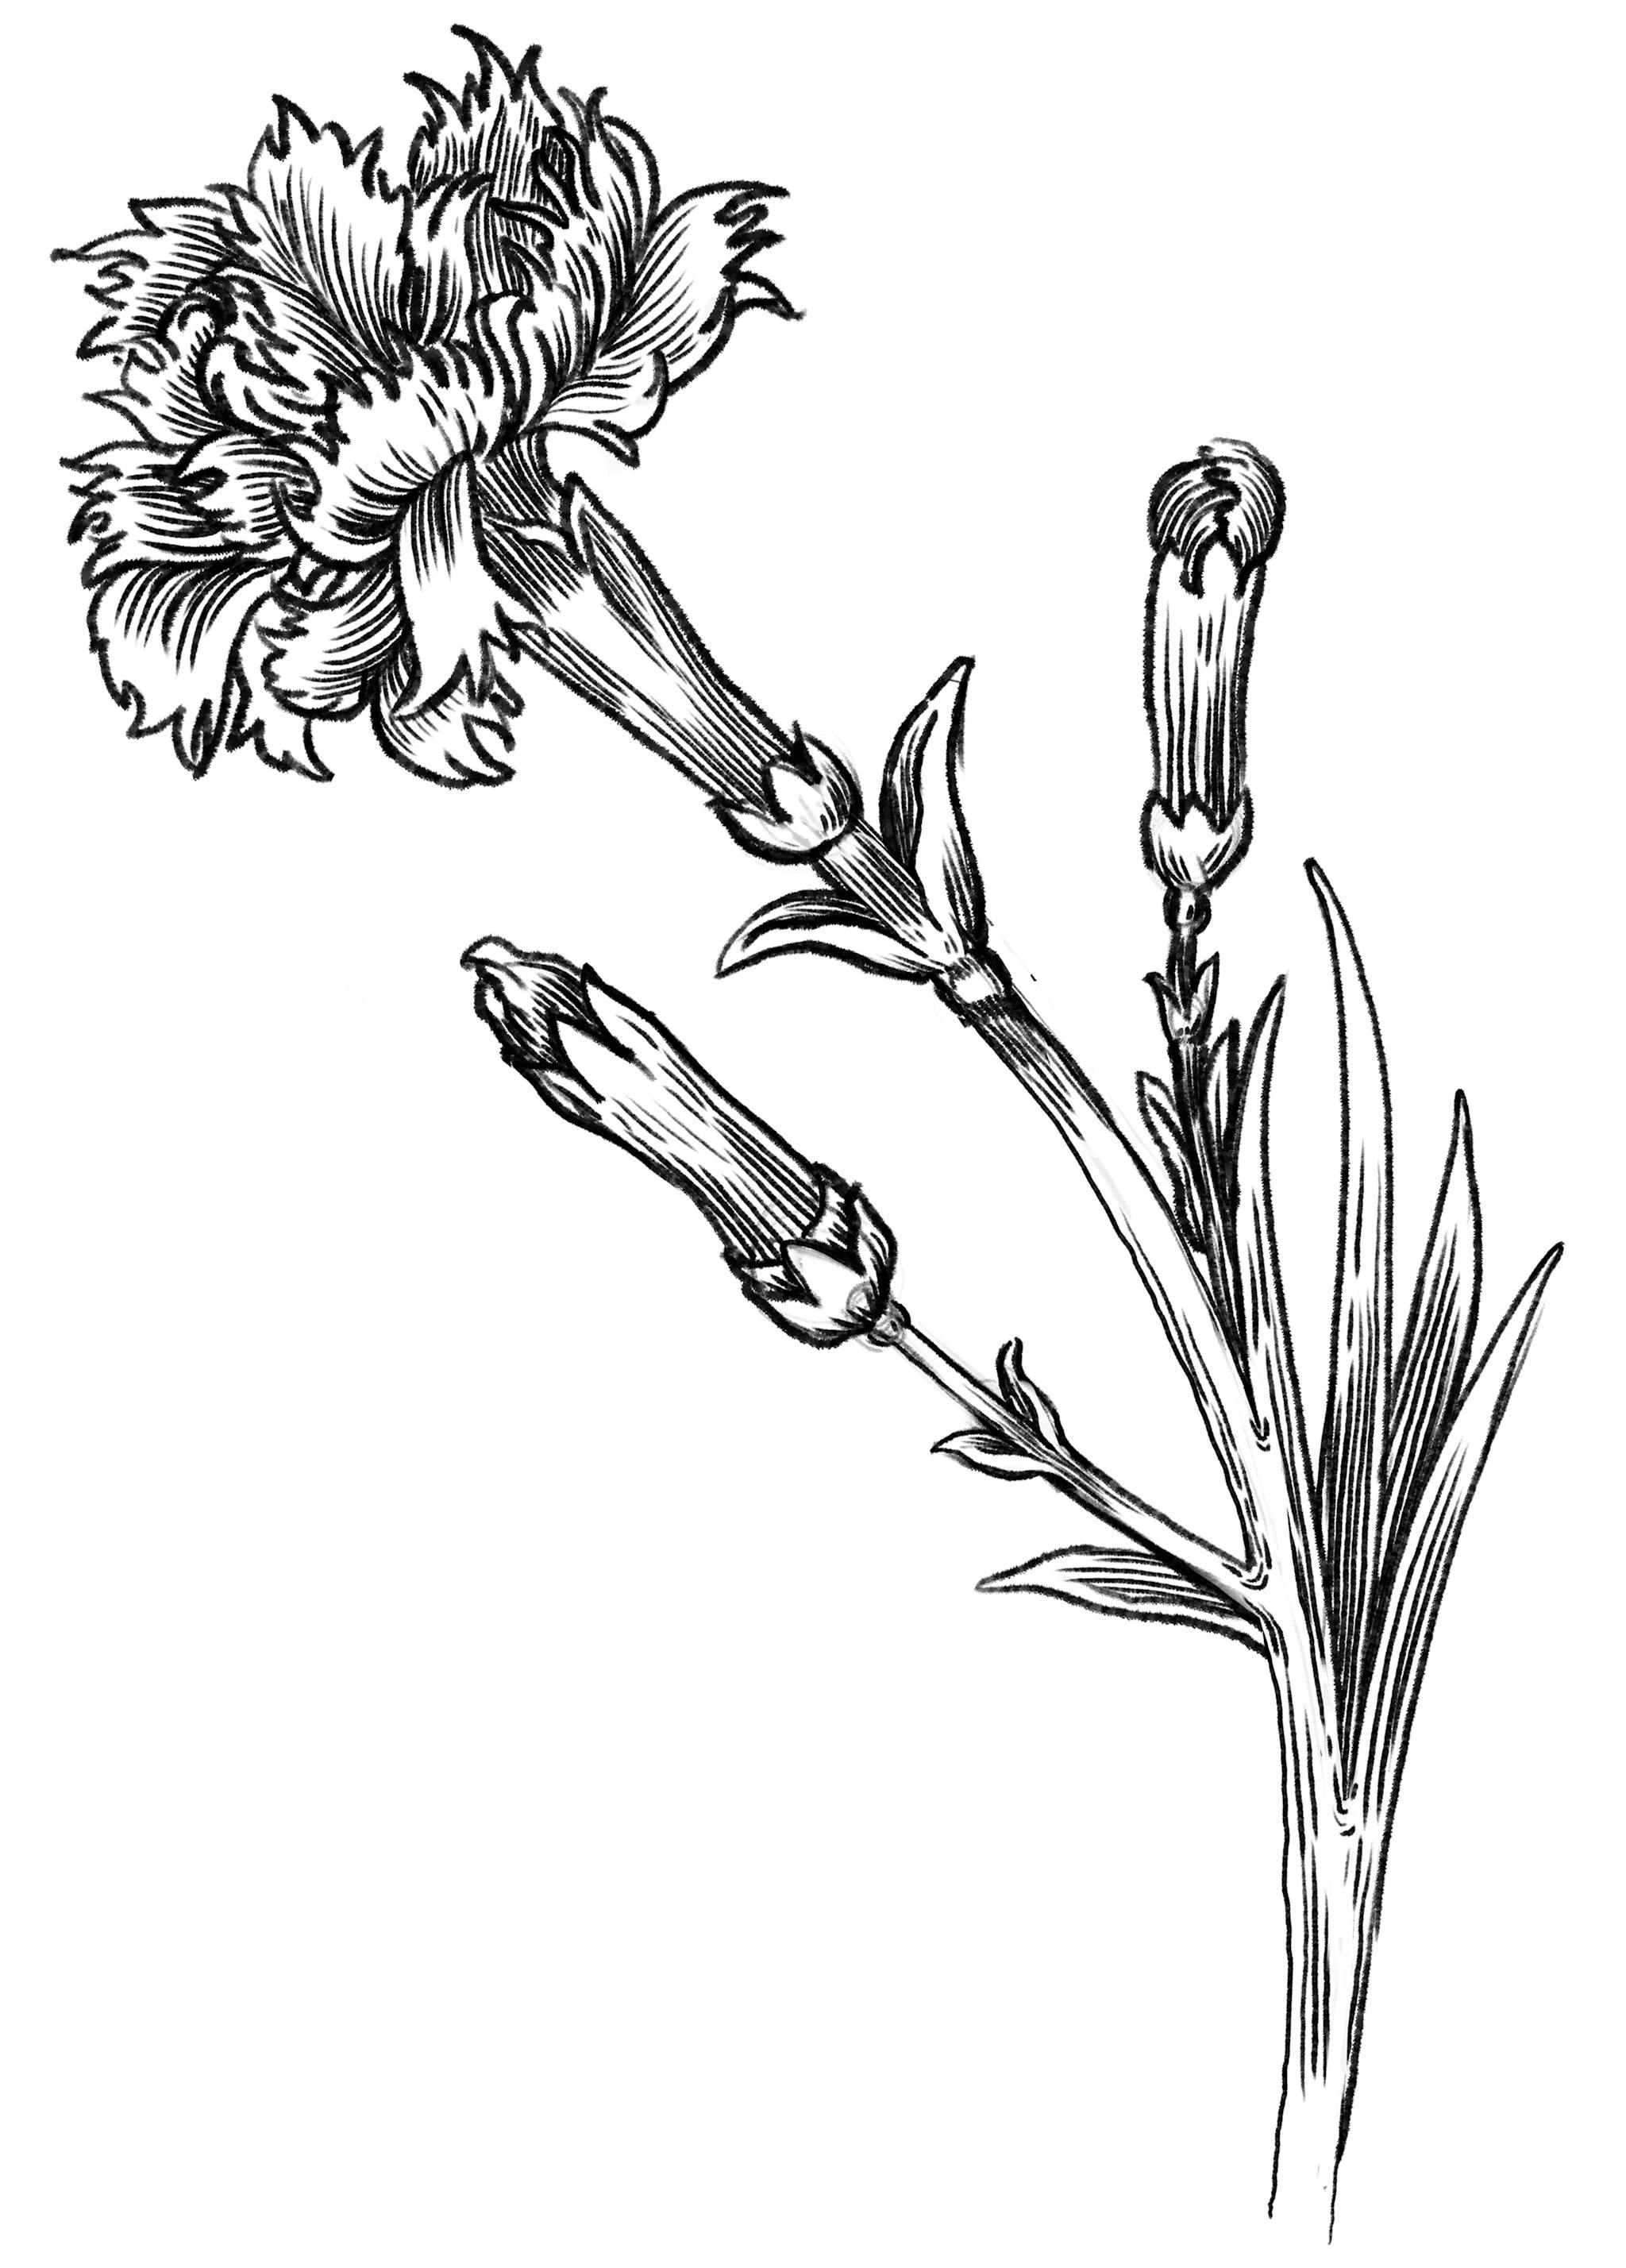 Illustration of a carnation in an XVI century engraving style